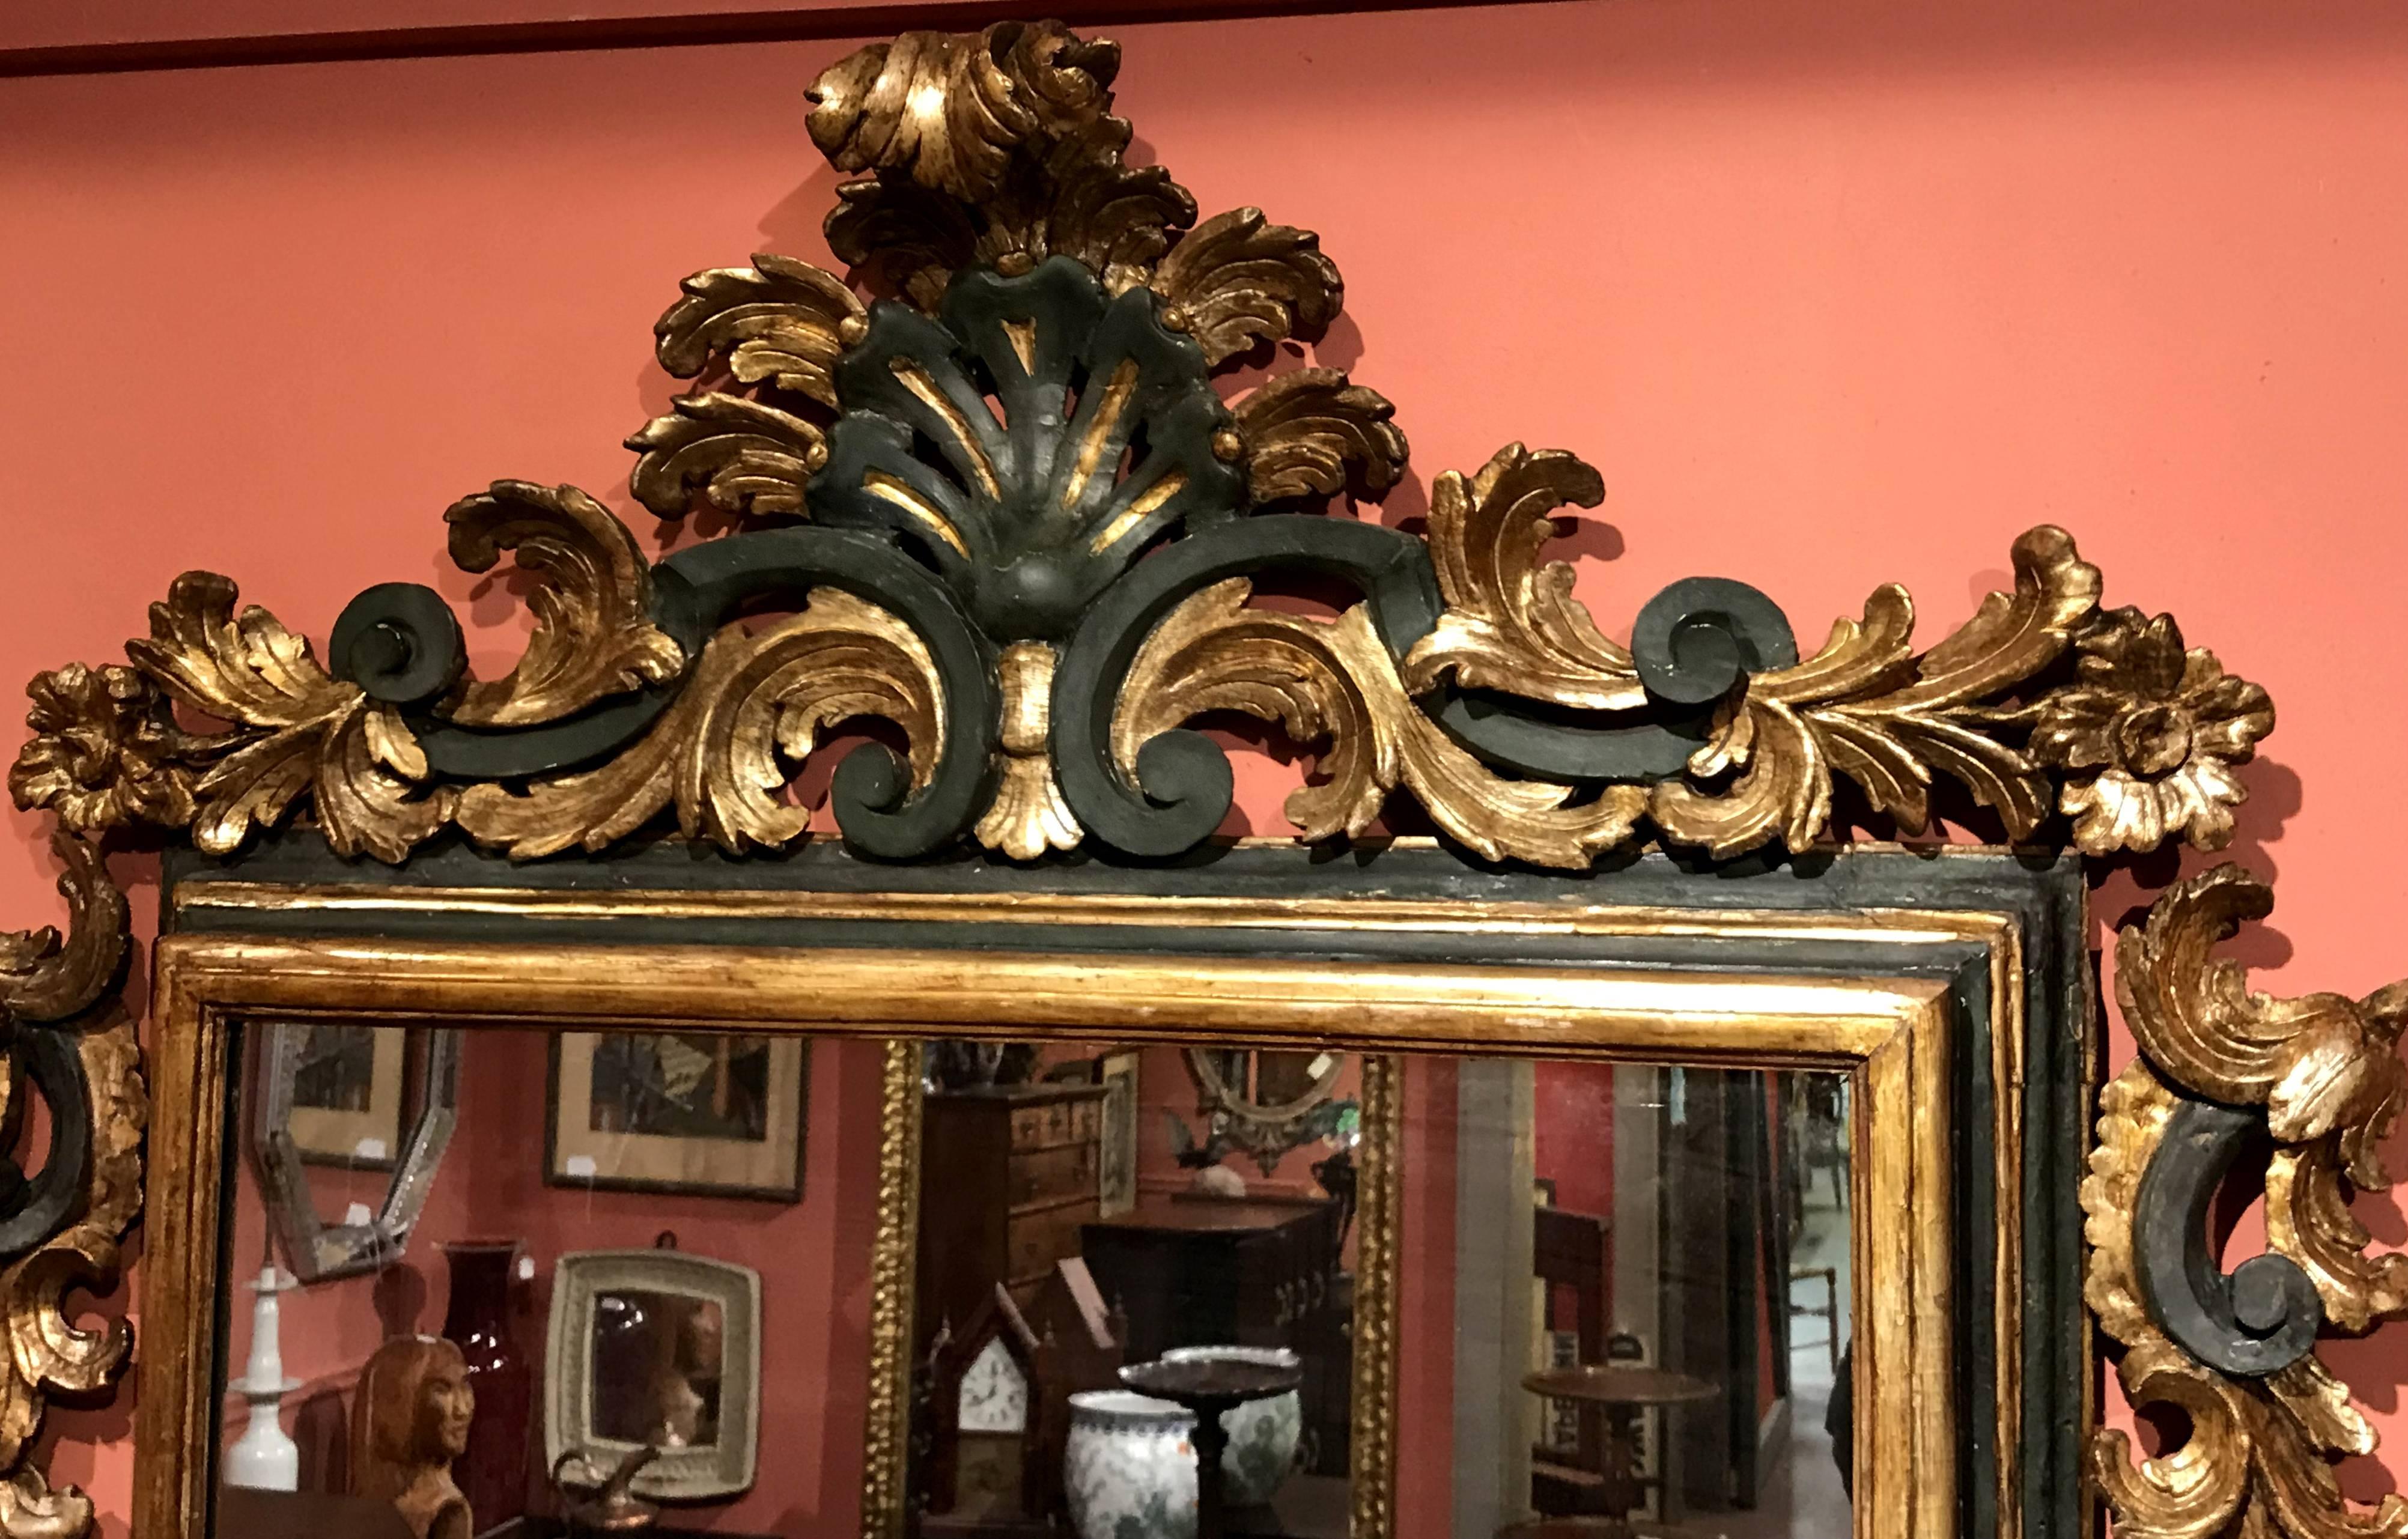 A fine Rococo wall mirror with polychrome and gilt molded wooden frame, highlighted with an exceptional foliate and scroll carved crest and surround. Italian, dating to the mid 18th century, in fine overall condition, with restorations and